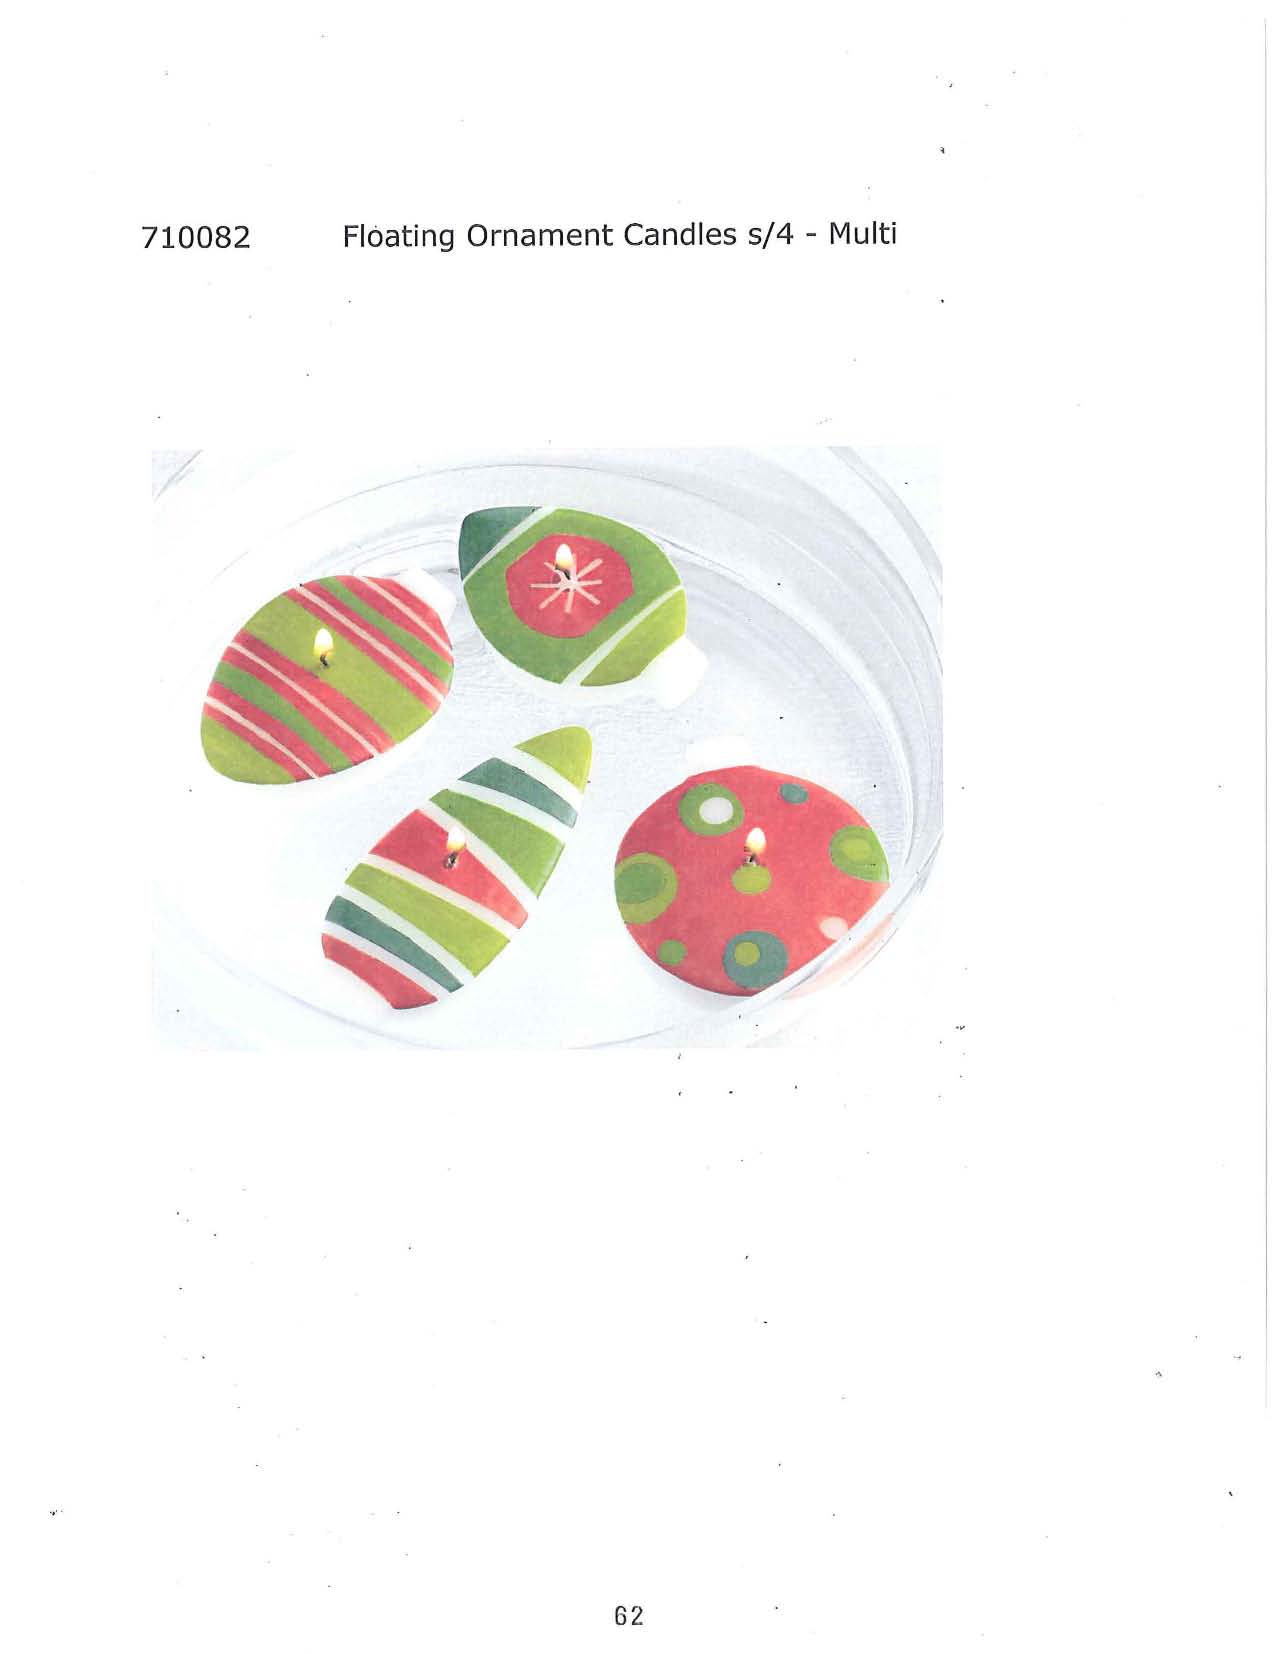 Floating Ornament Candle s/4 - Multi